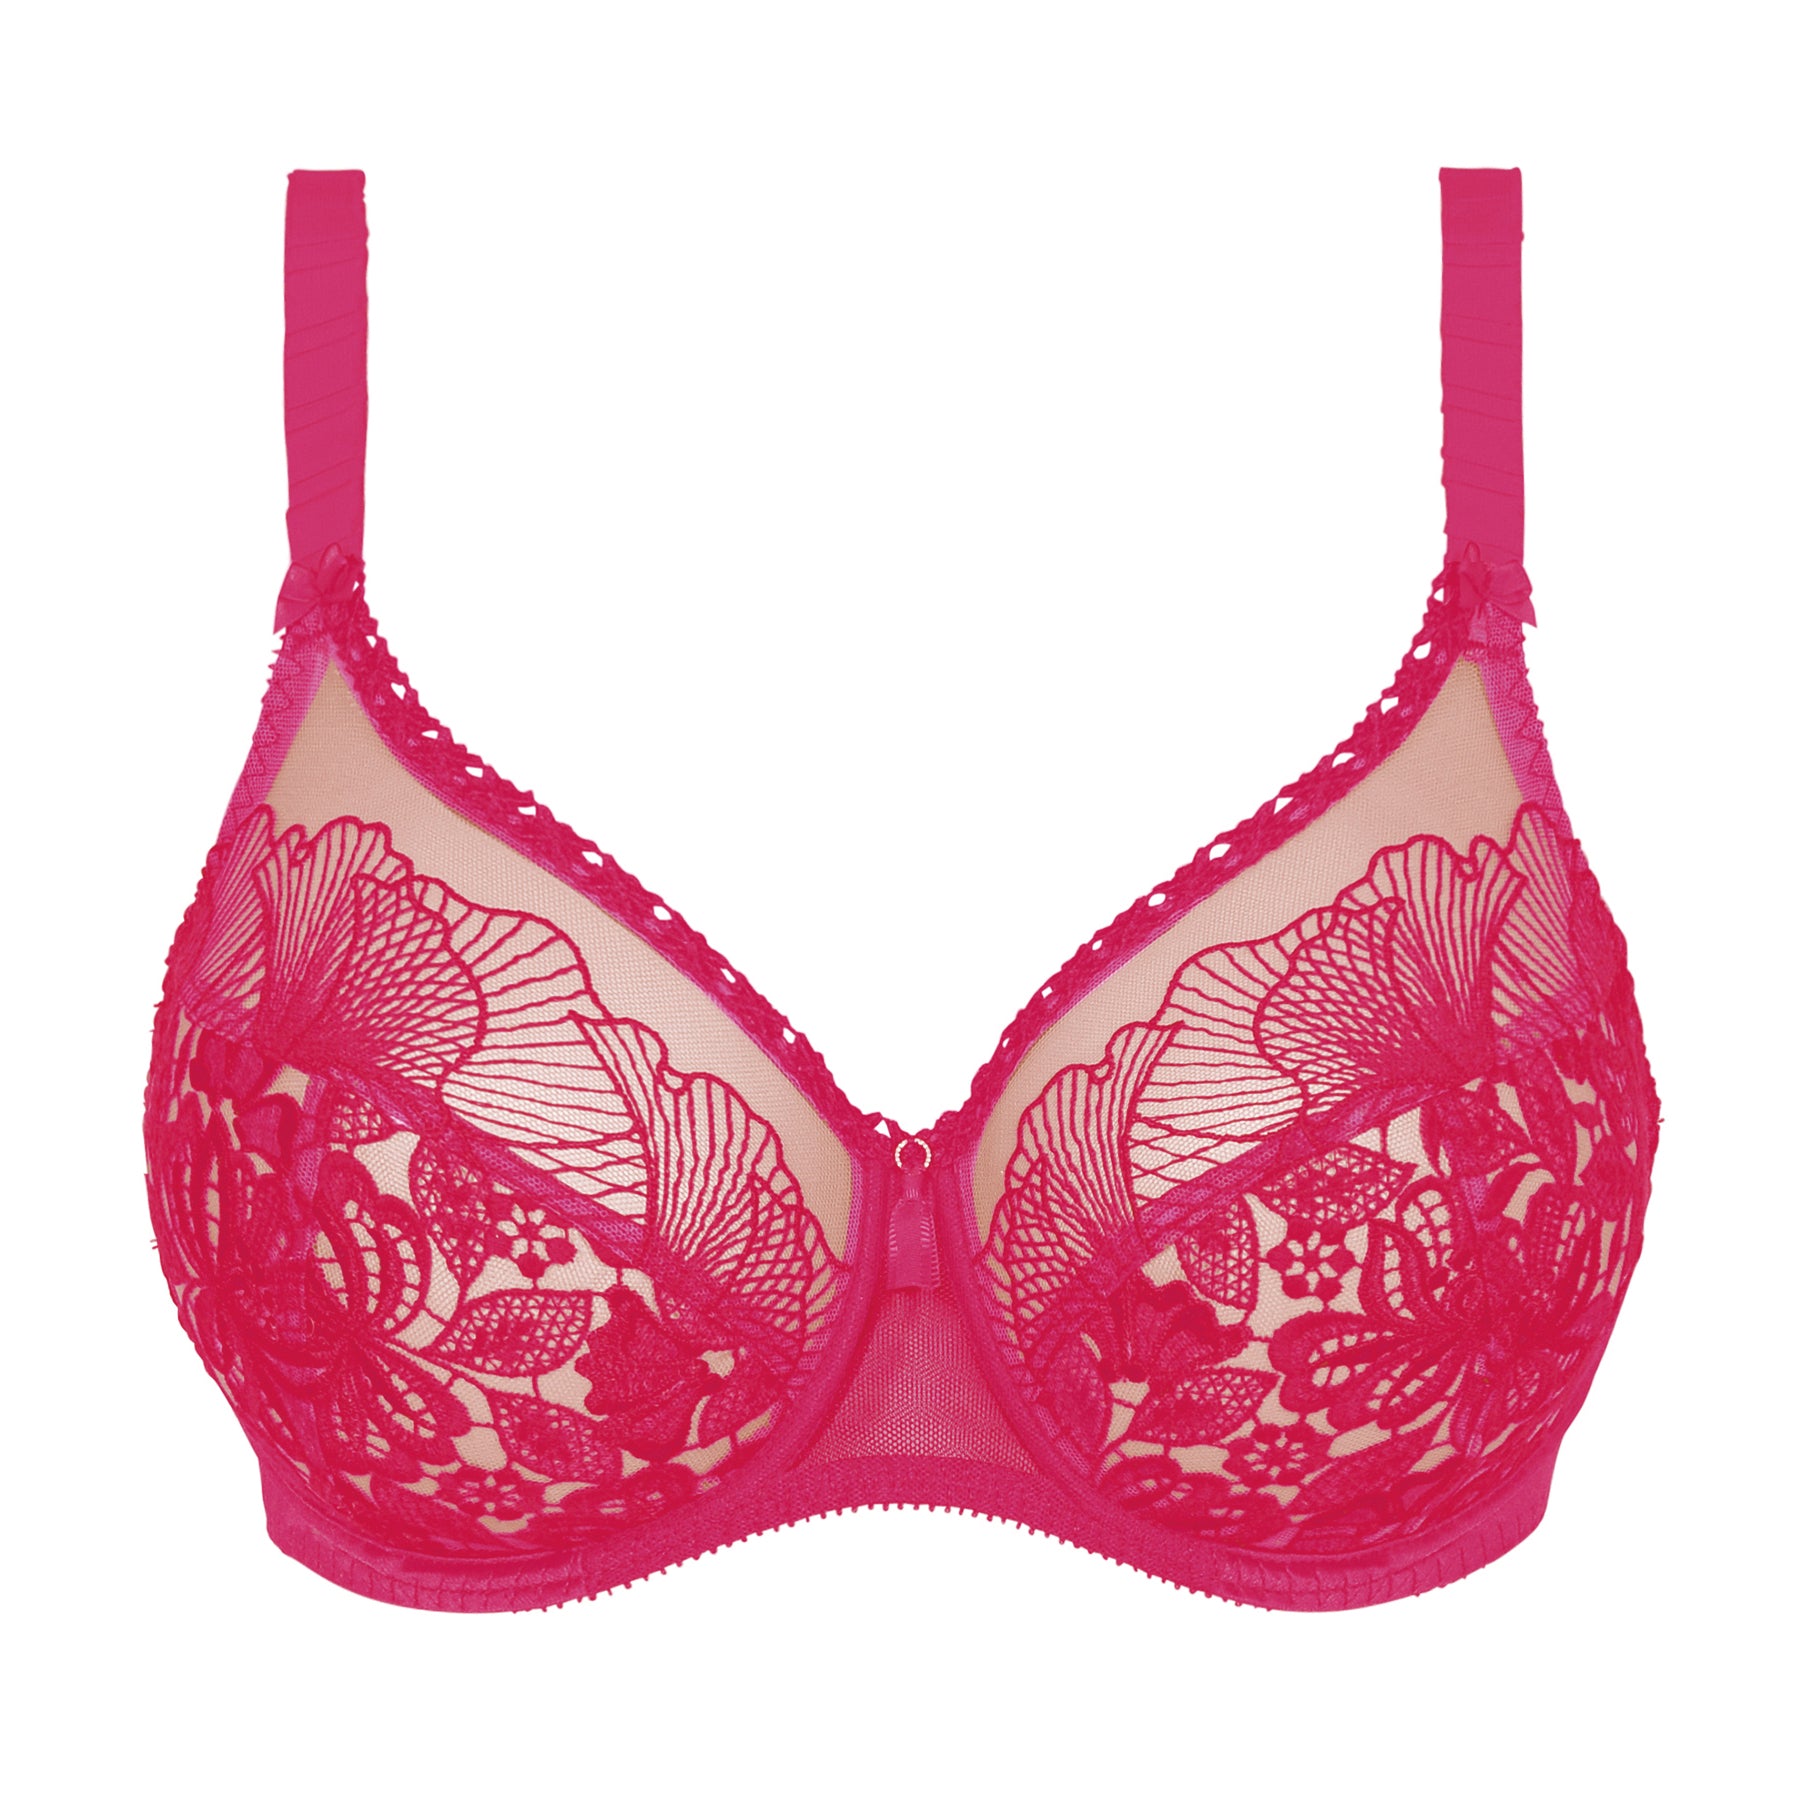 LALA Gracy Full Cup Brassiere - Grant E Ones